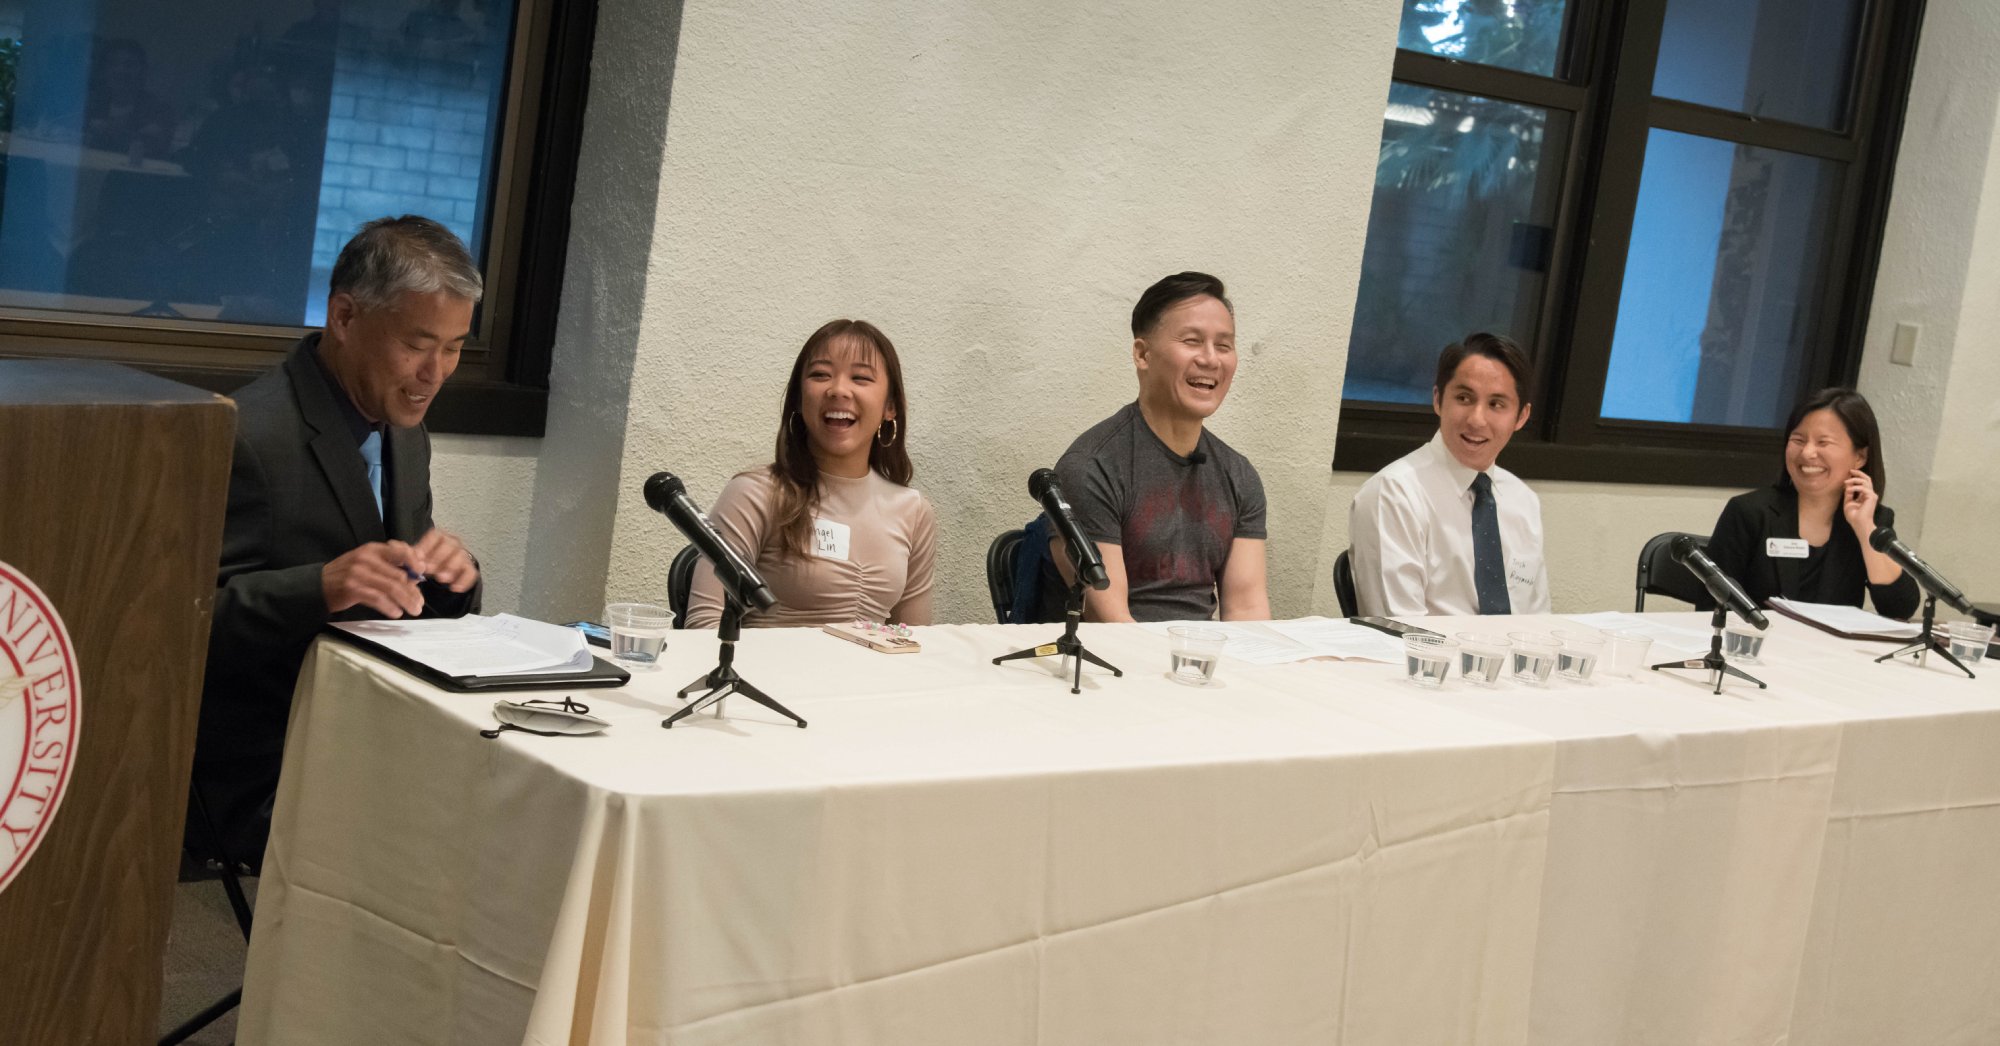 BD Wong at a table with four other speakers